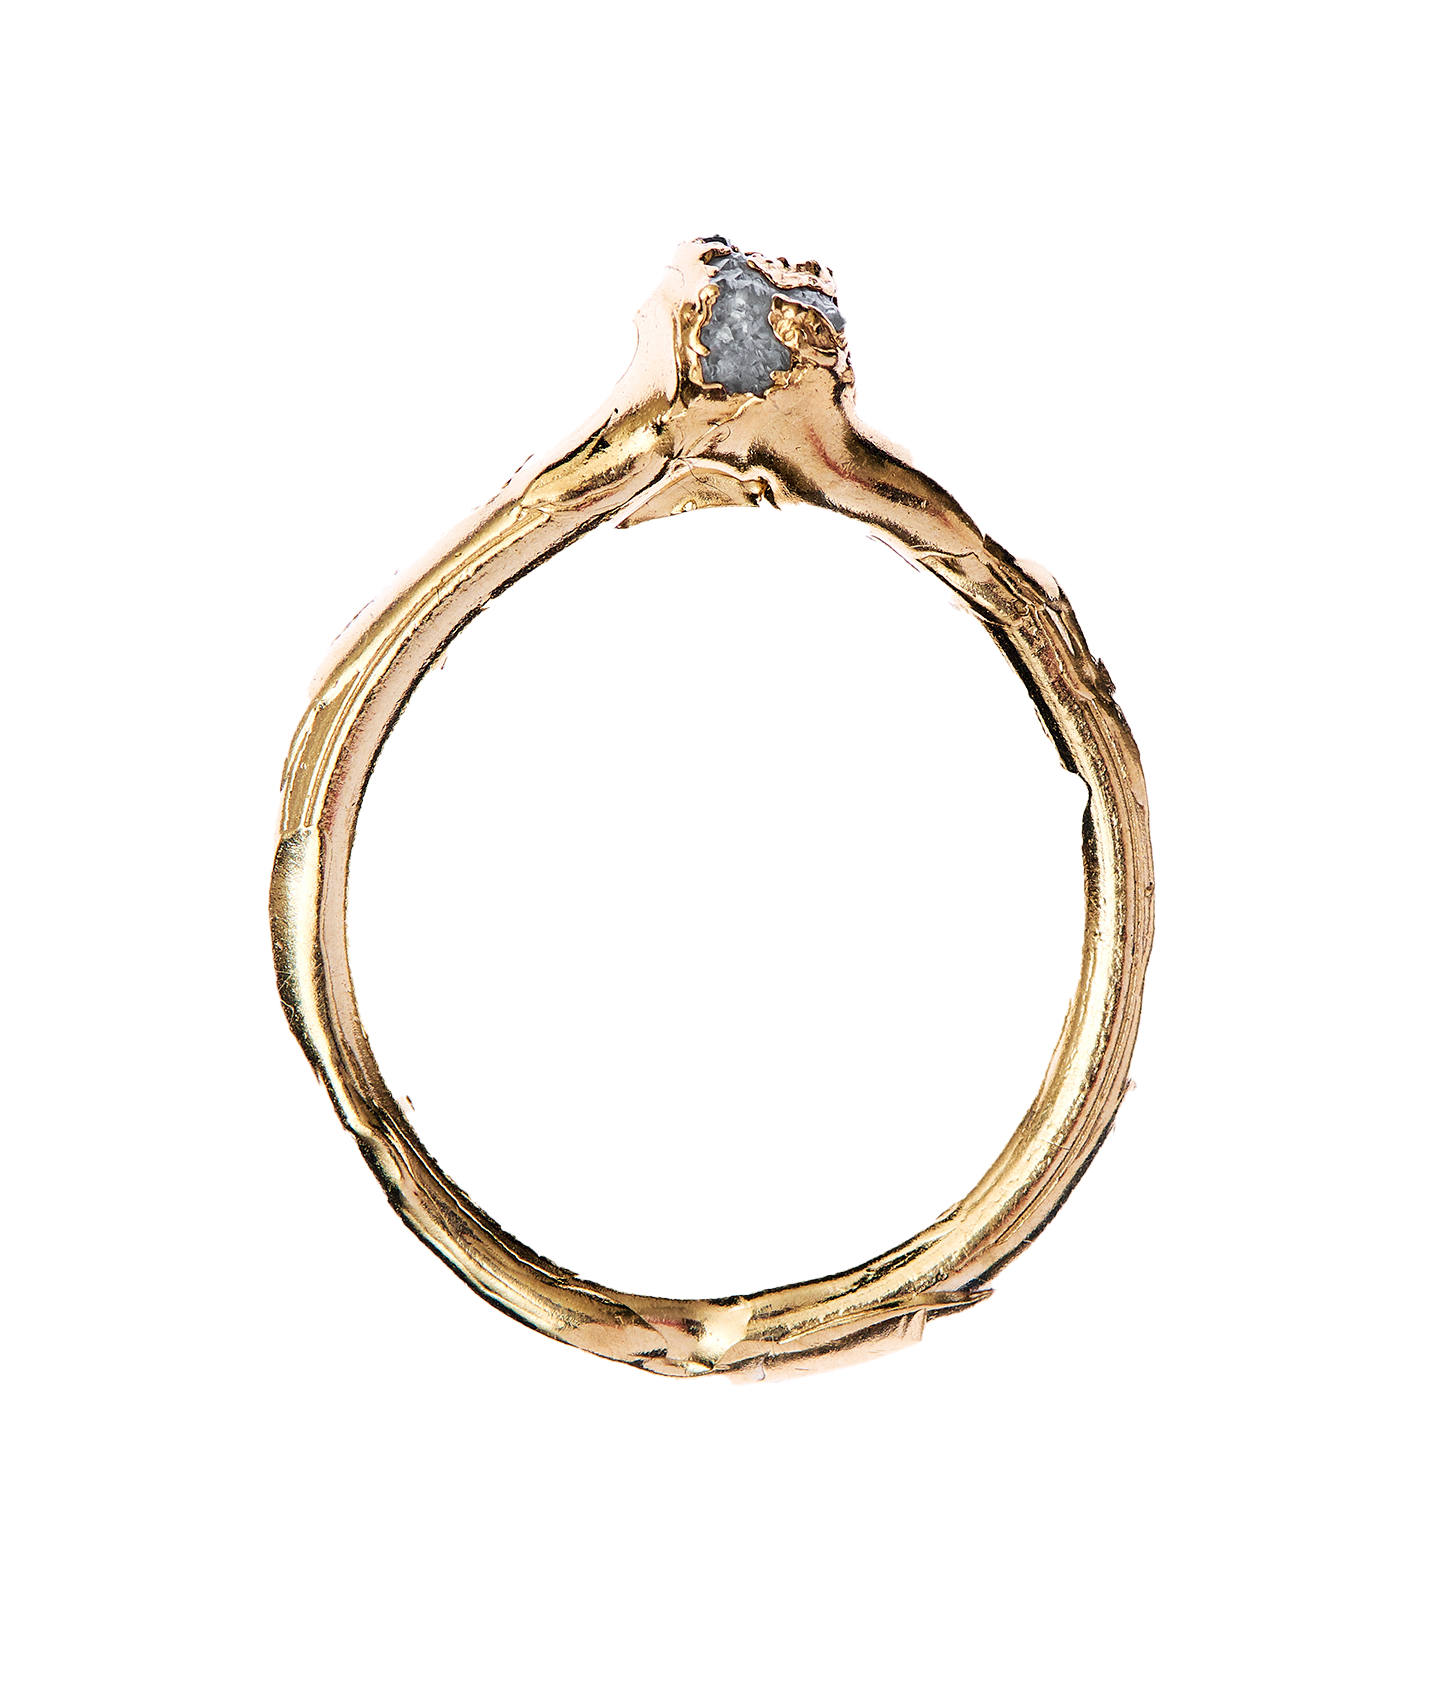 The Initial Spark Ring